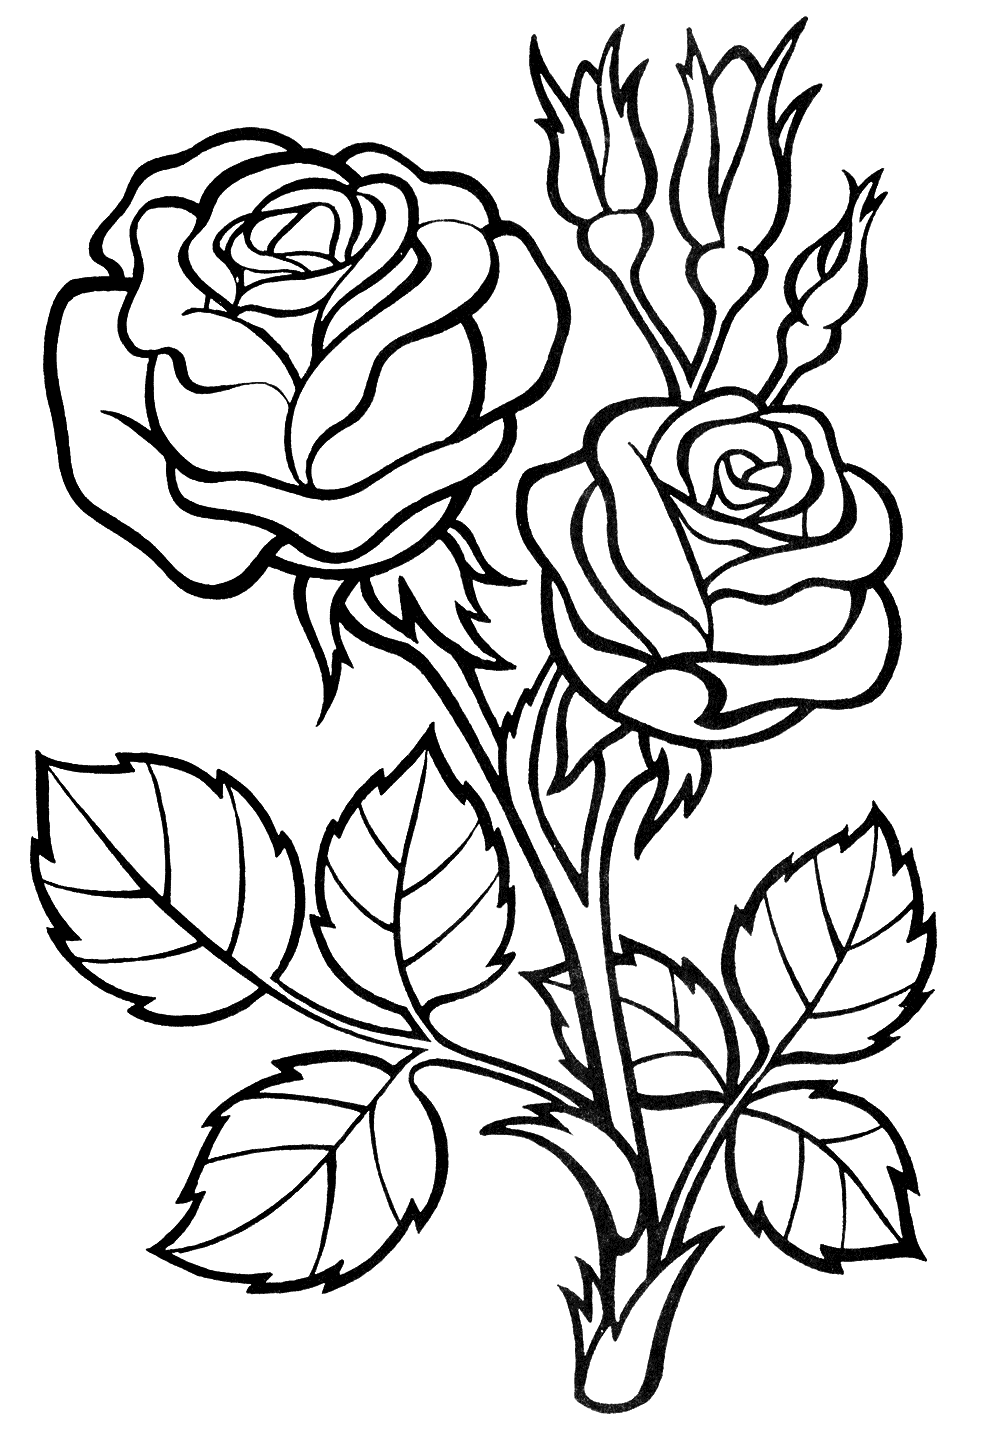 Printable Coloring Pages Of Roses